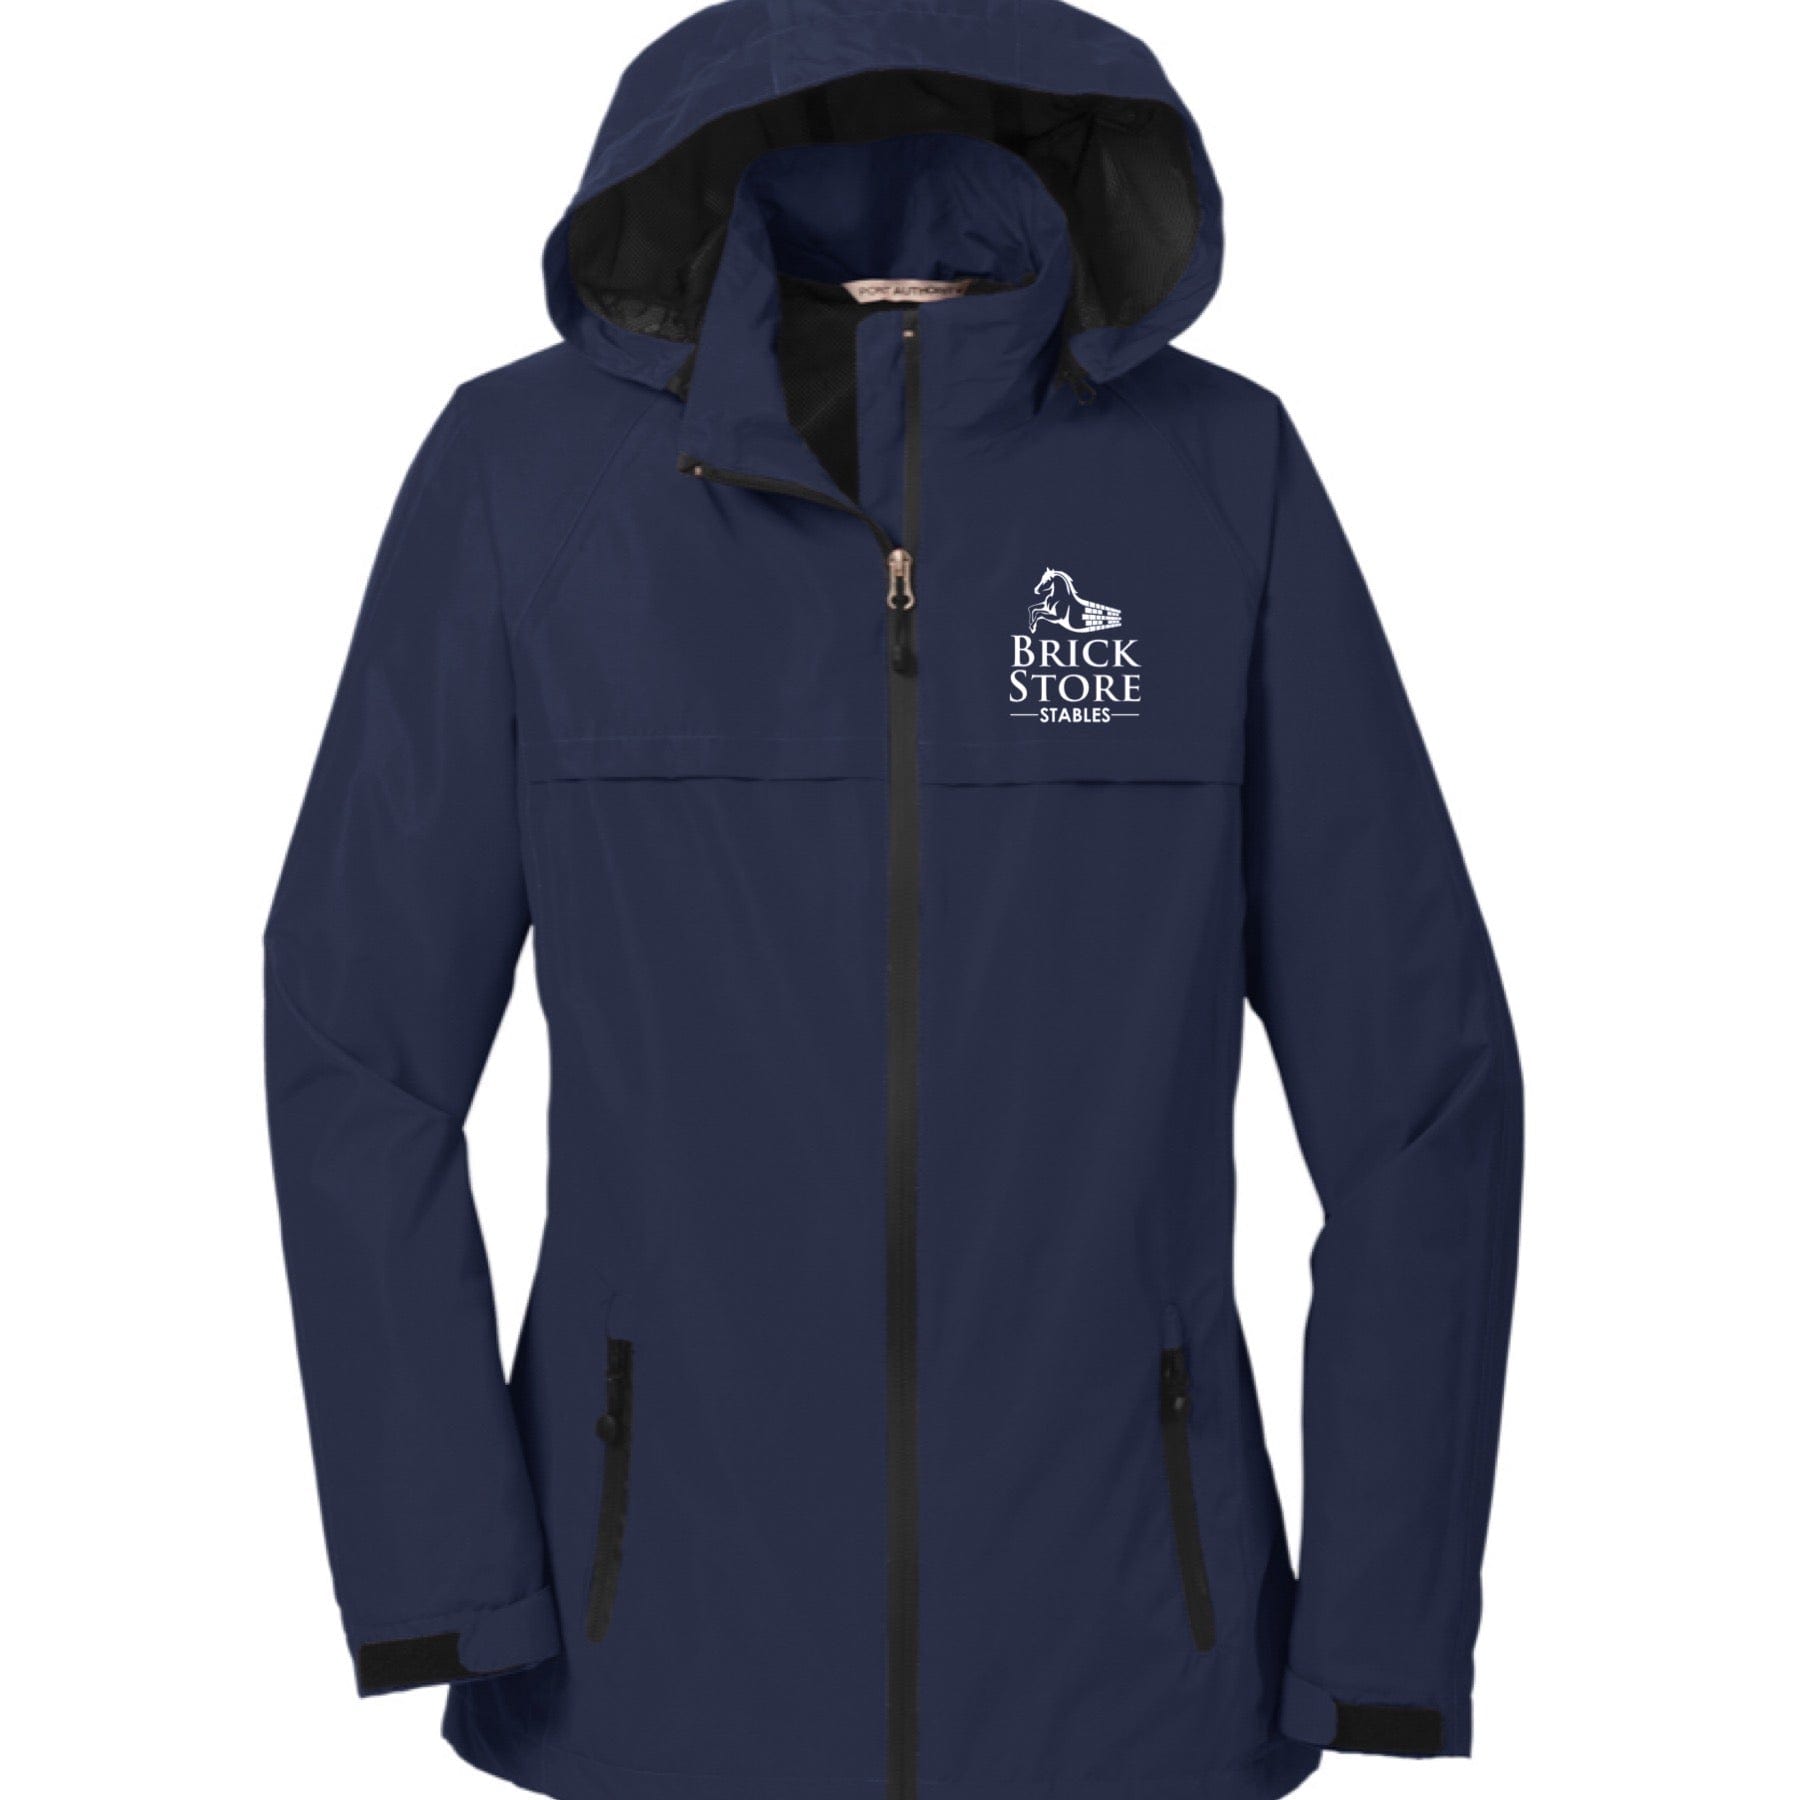 Equestrian Team Apparel Brick Store Stables Raincoat equestrian team apparel online tack store mobile tack store custom farm apparel custom show stable clothing equestrian lifestyle horse show clothing riding clothes horses equestrian tack store